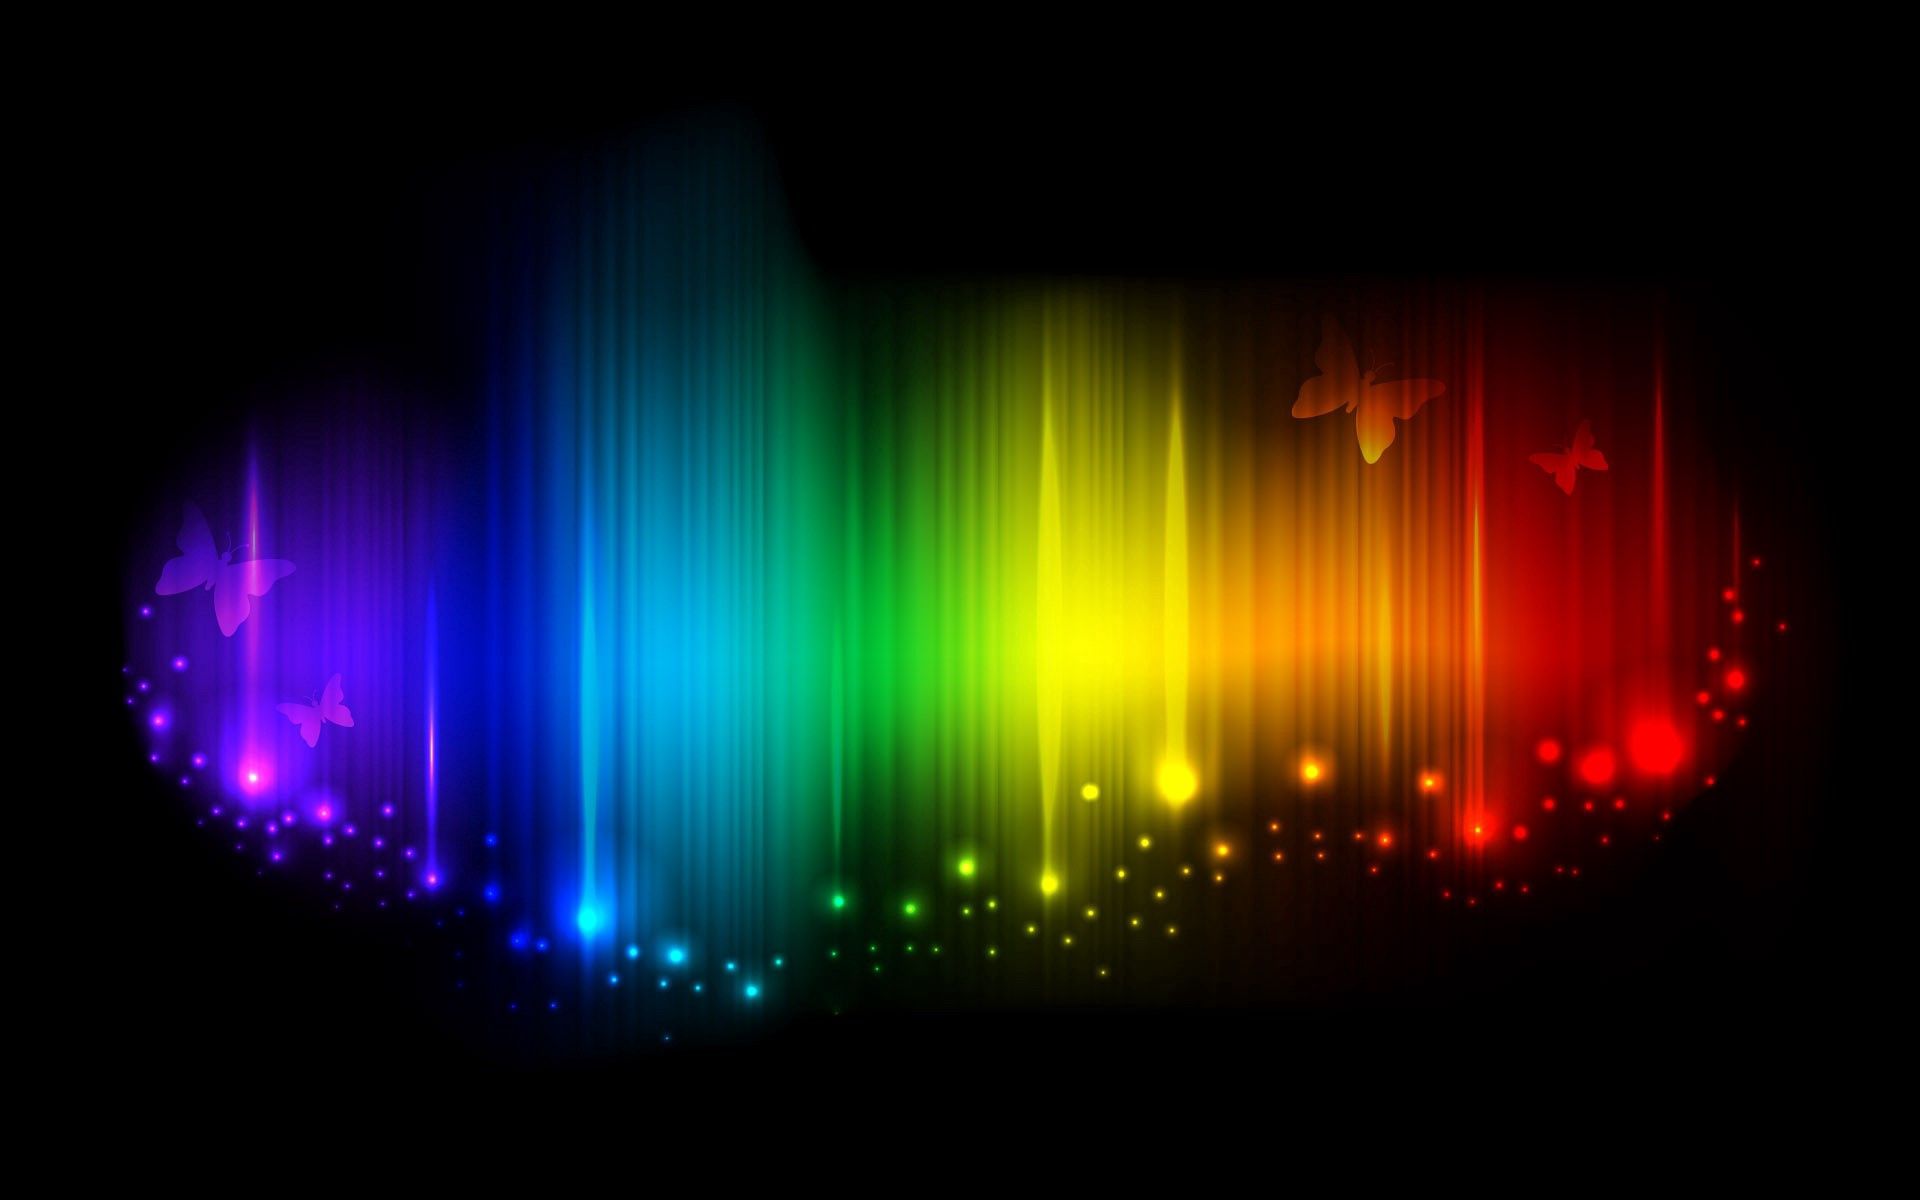 Cool Wallpapers rainbow, abstract, butterflies, shine, light, lines, shadow, iridescent, mood